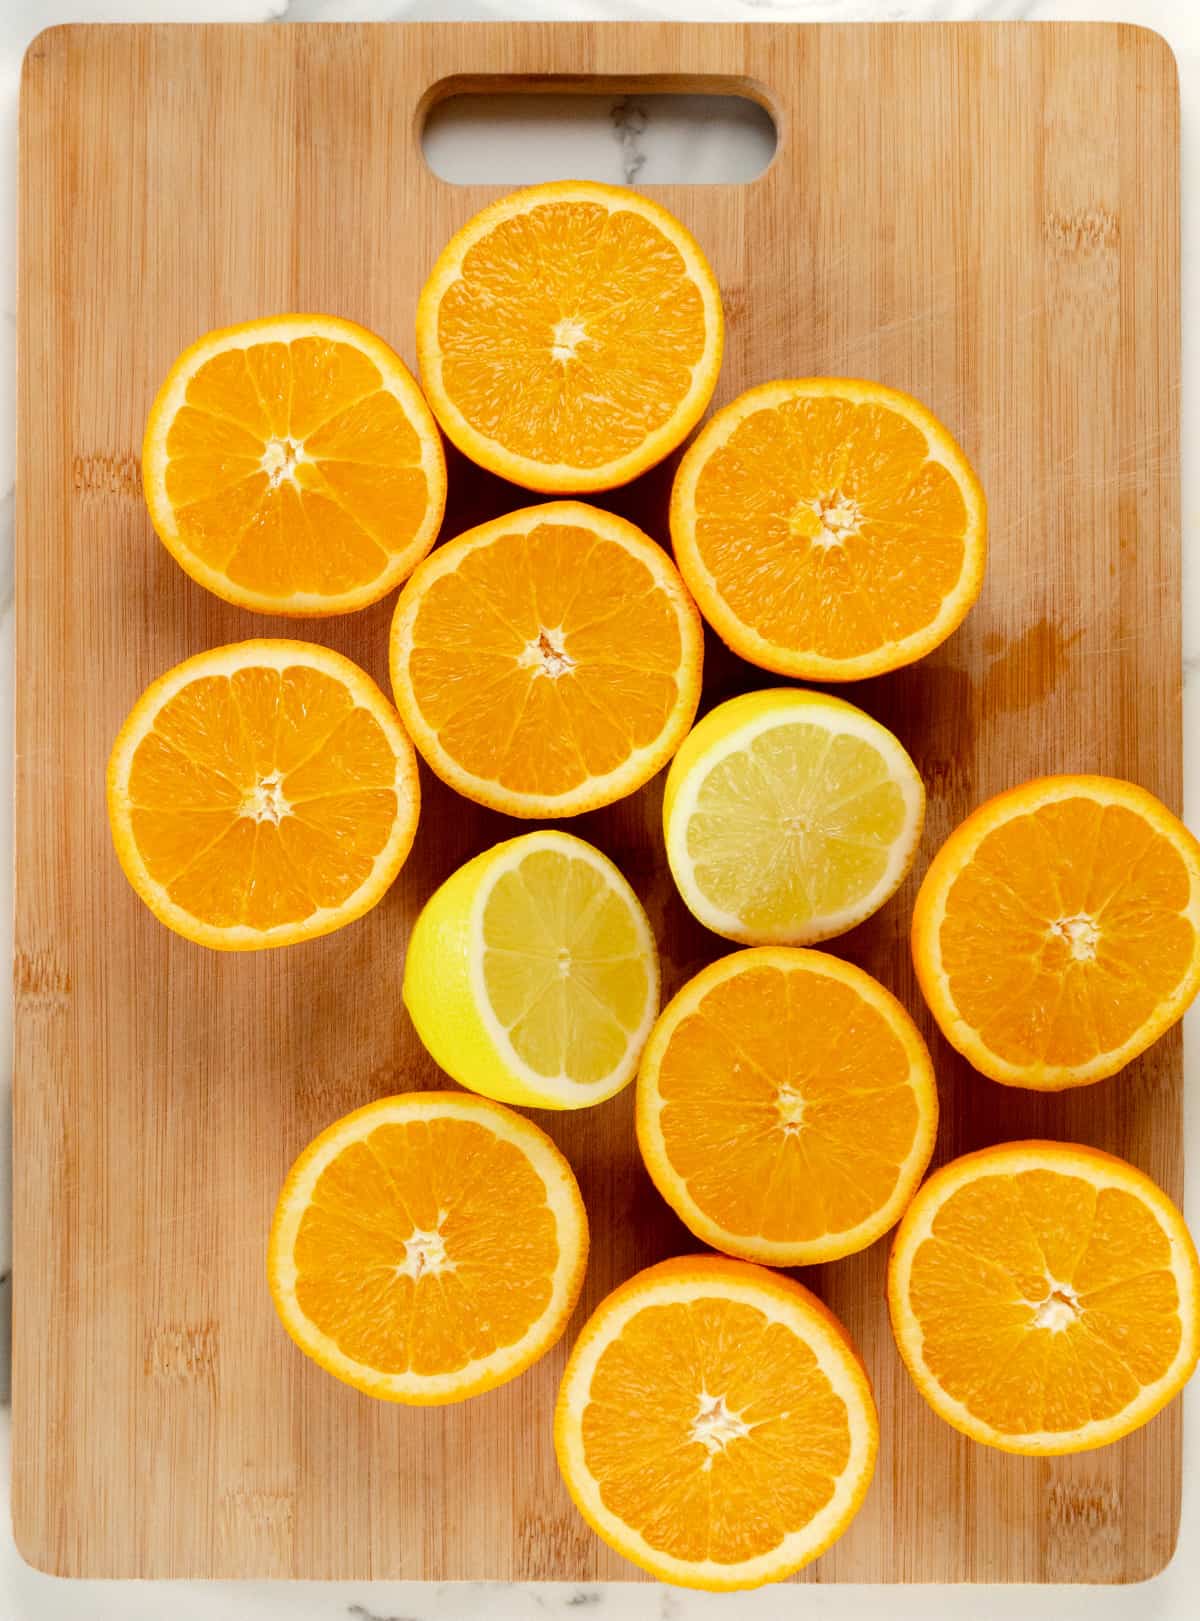 oranges and lemons laid out on a wood chopping board